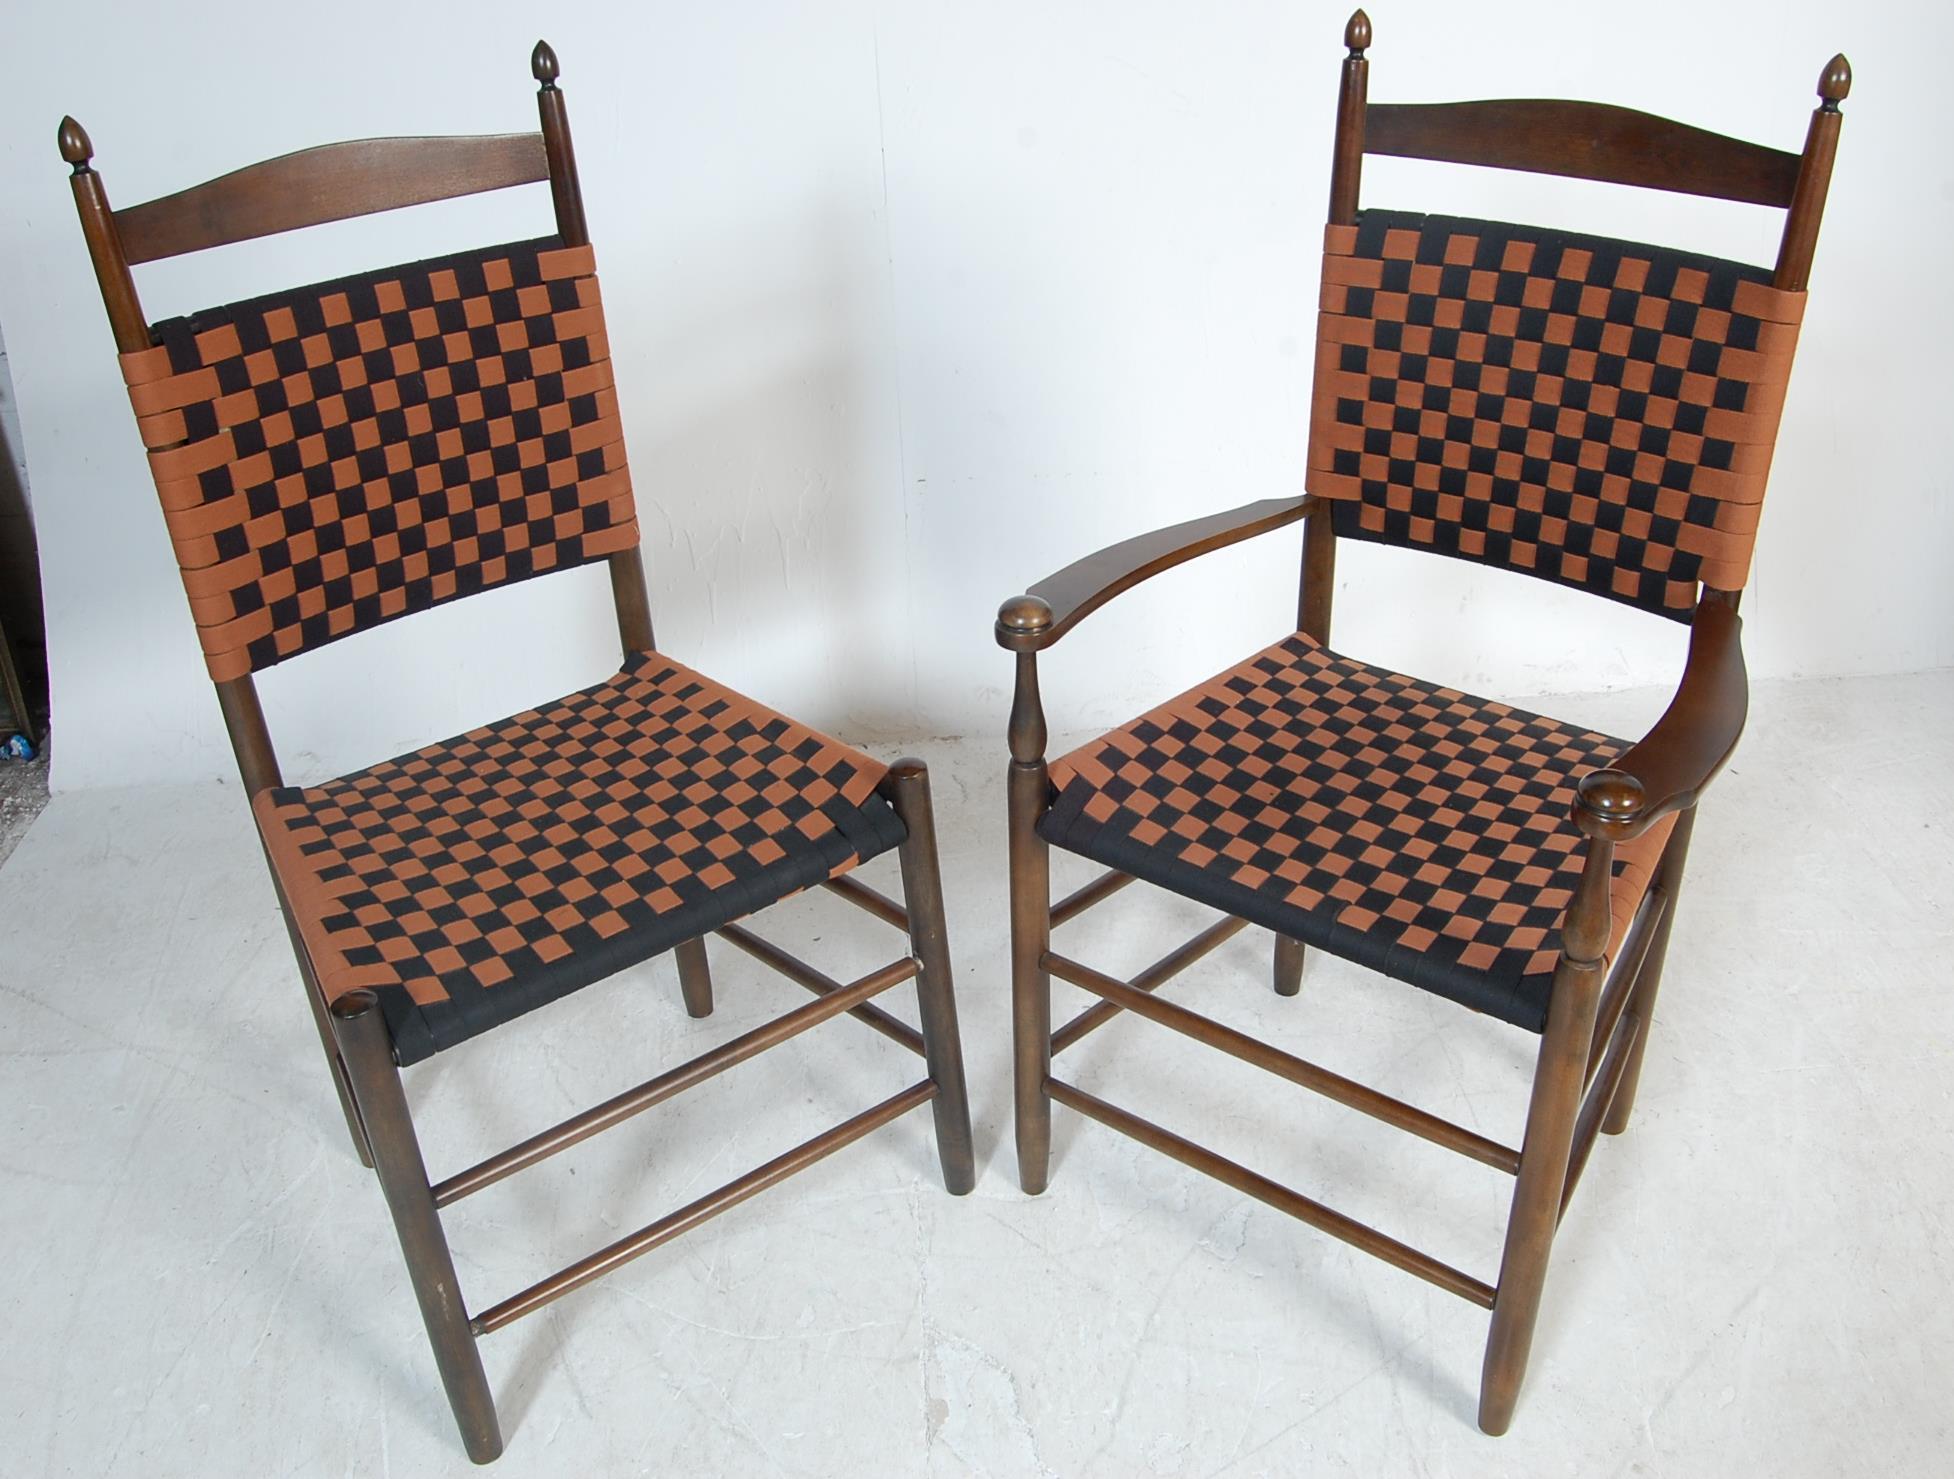 SET OF 10TH VINTAGE STYLE DINING CHAIRS - Image 3 of 6